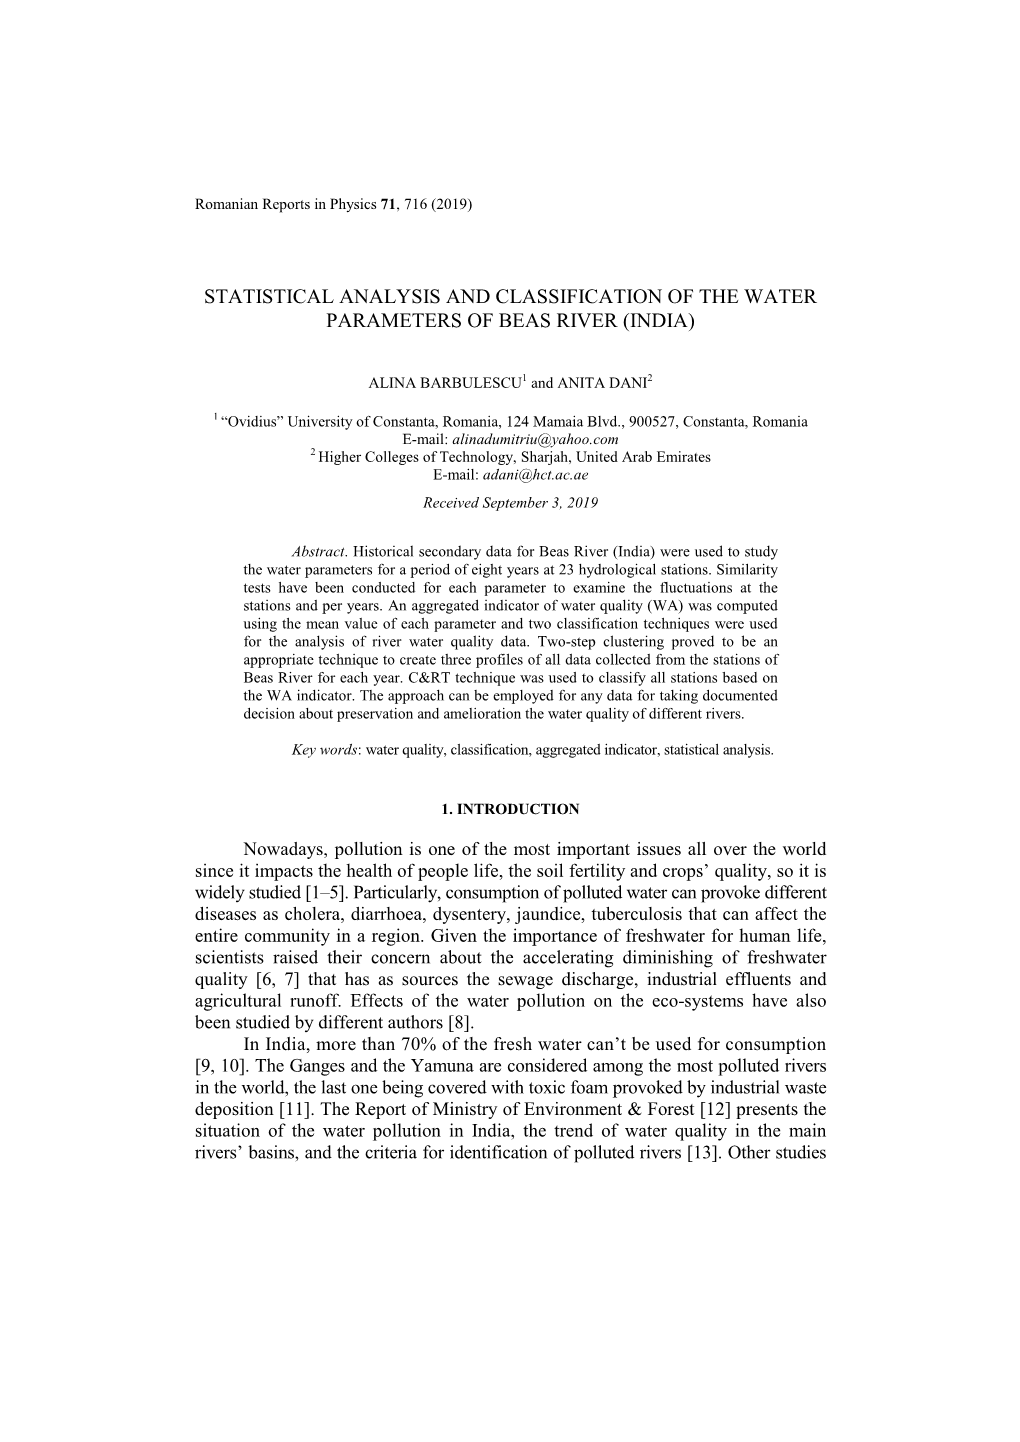 Statistical Analysis and Classification of the Water Parameters of Beas River (India)